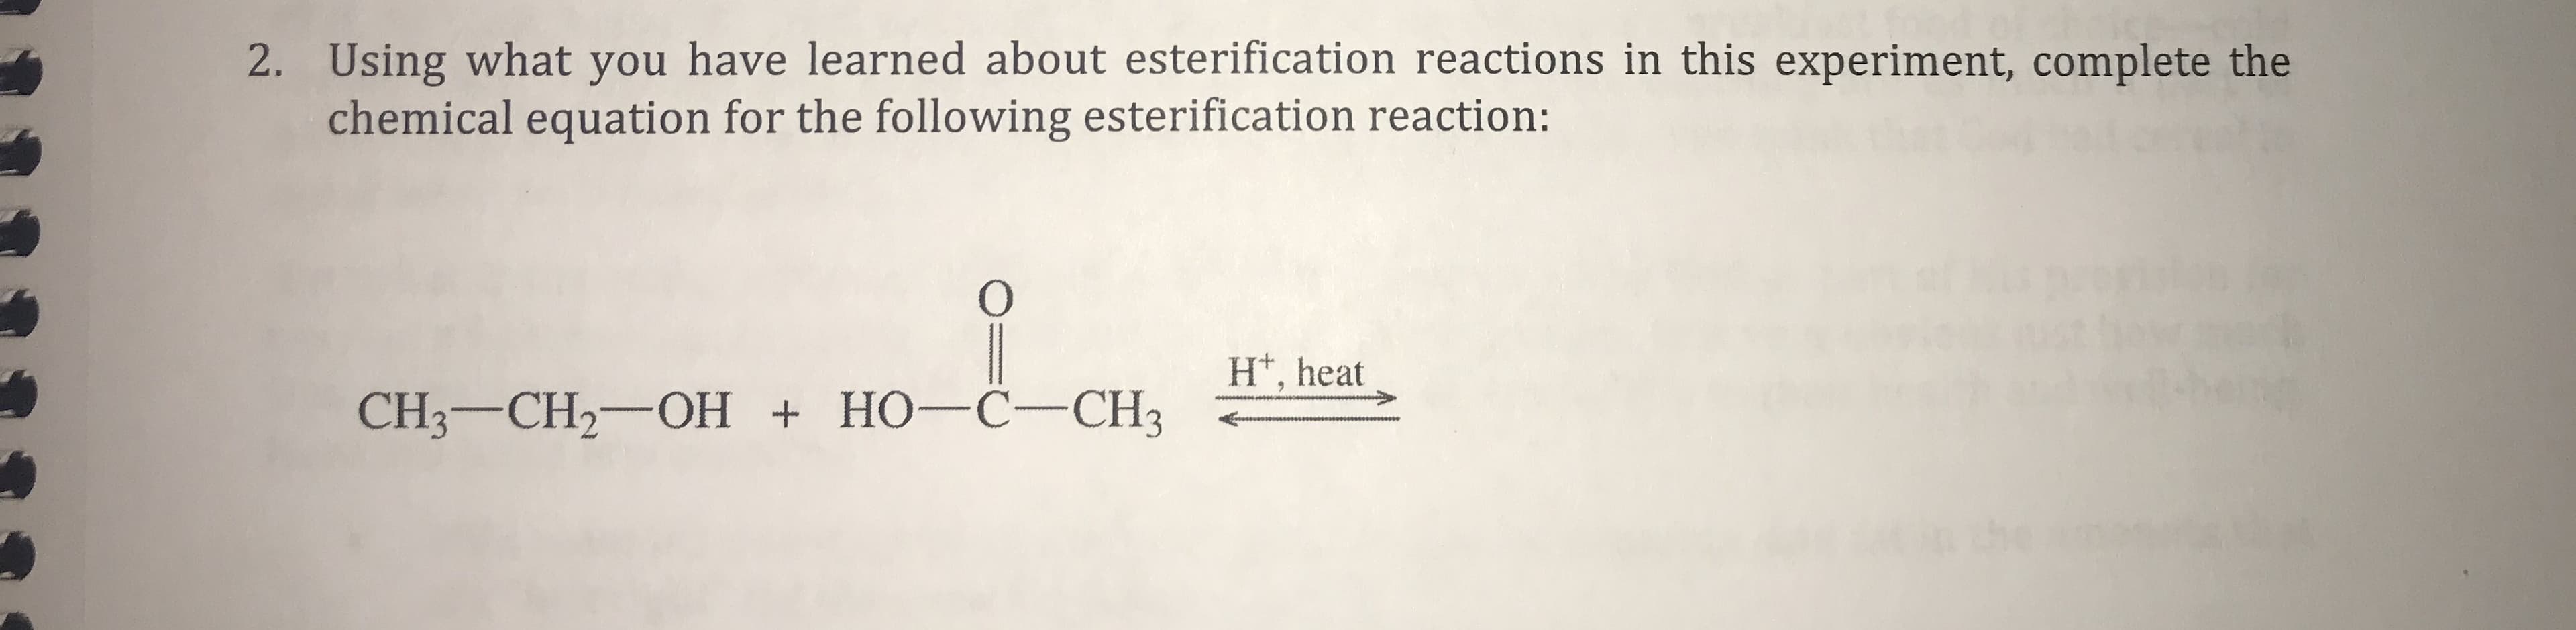 2. Using what you have learned about esterification reactions in this experiment, complete the
chemical equation for the following esterification reaction:
O
H*, heat
CH3-CH2 OH HO-C- CH3
